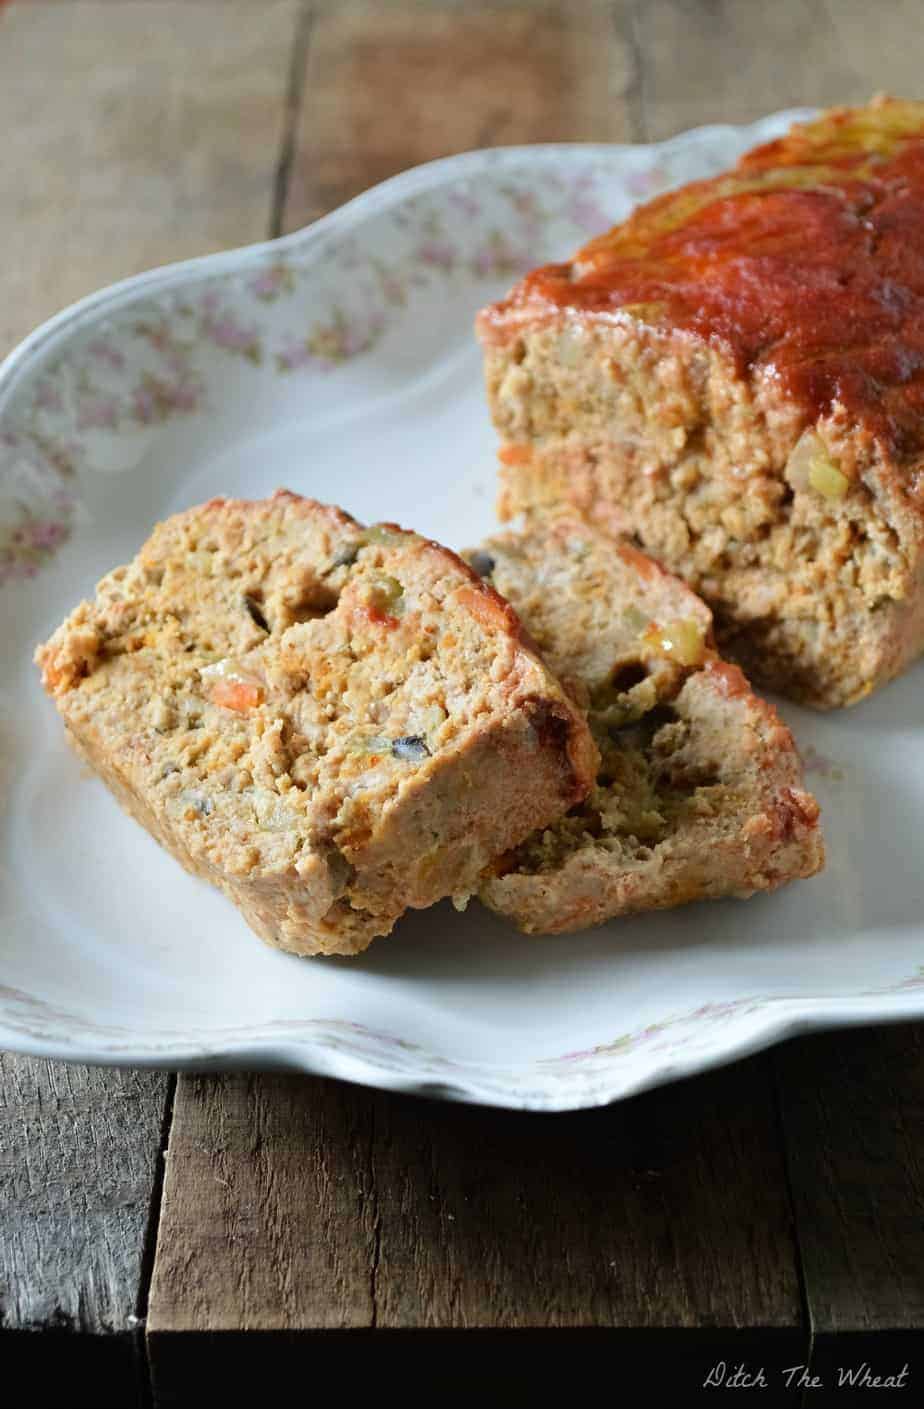 Insanely Awesome Paleo Meatloaf (Keto & Gluten Free)